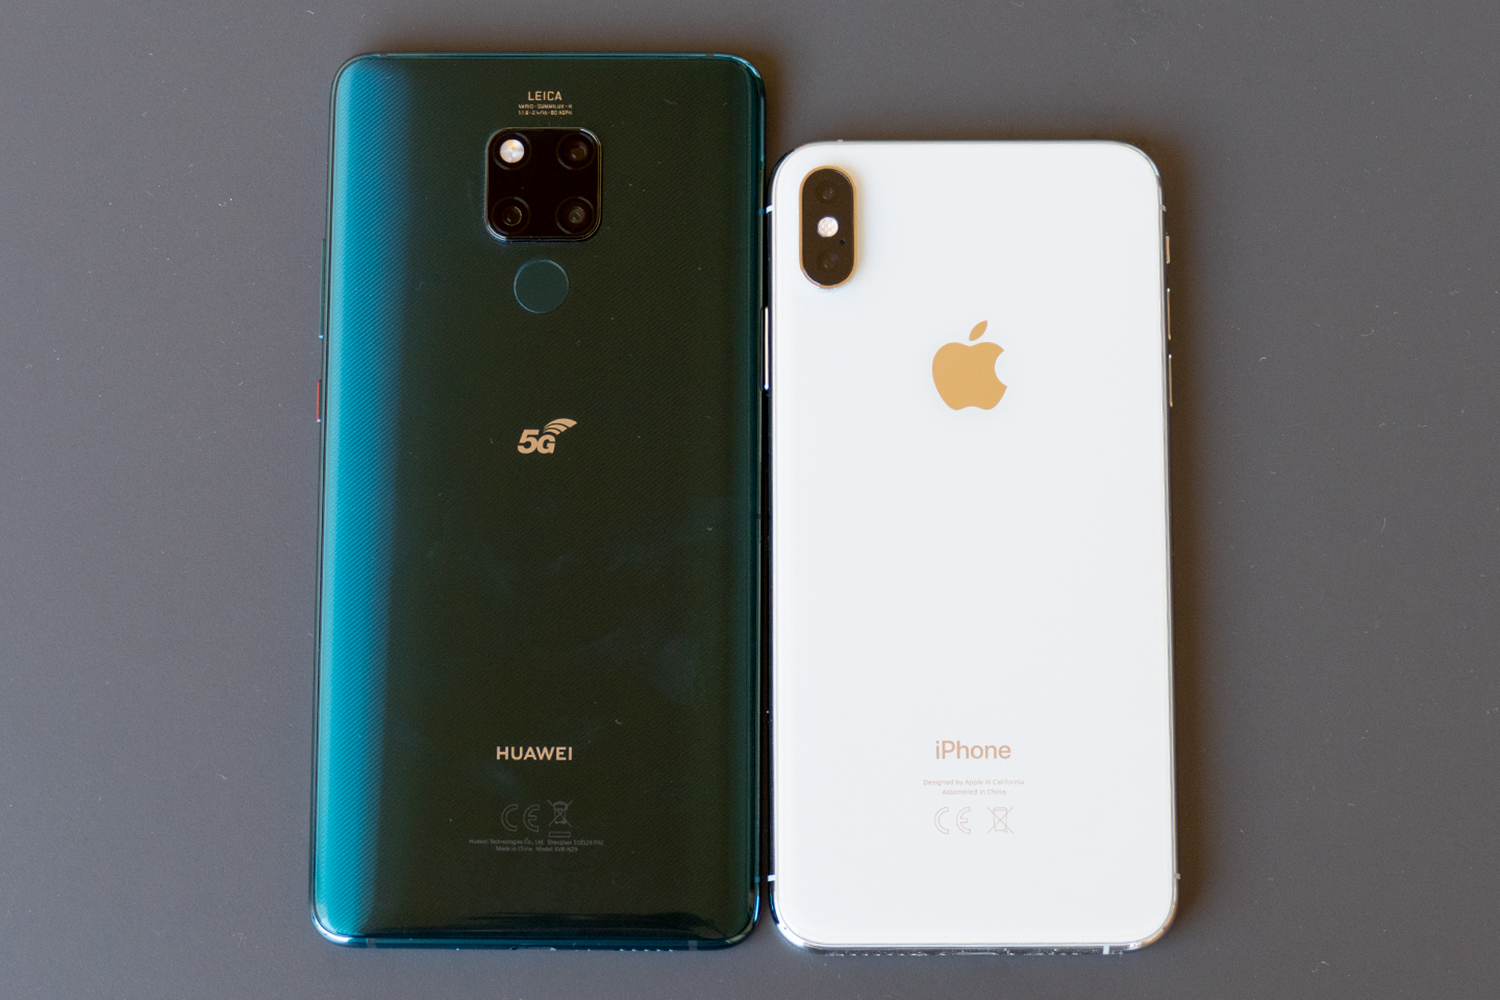 tempel kleding stof bout Huawei Mate 20 X 5G Hands-on Review | Digital Trends